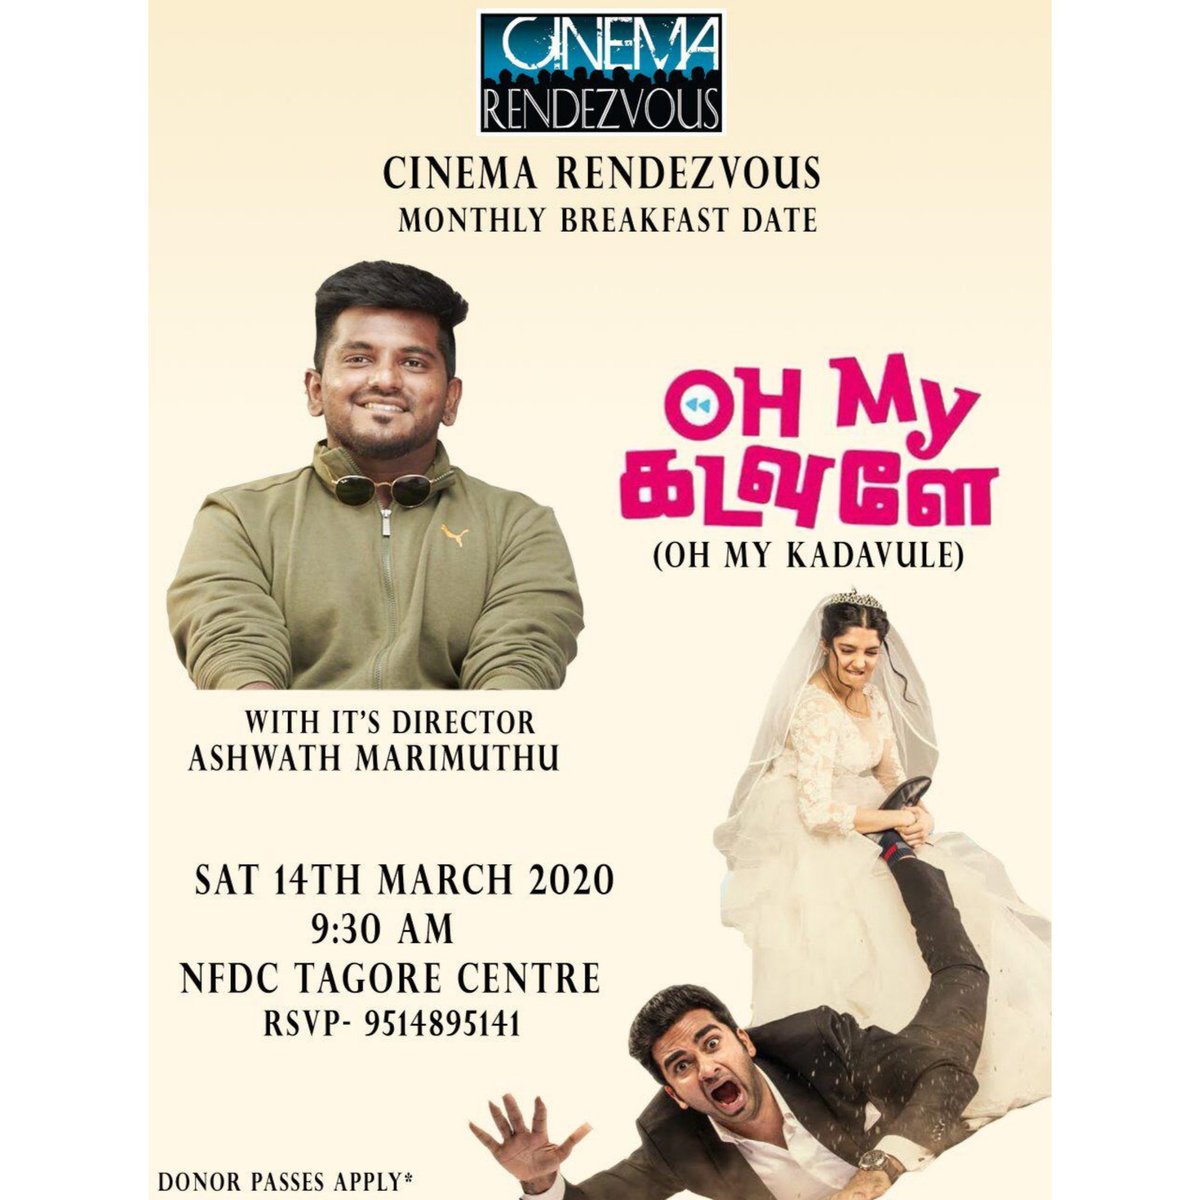 Rescheduled Cinema Rendezvous
Join us with #AshwathMarimuthu and his breezy debut film #OhMyKadavule
Saturday, 14 March
9:30am, NFDC Tagore Centre
Breakfast served from 9:15 am onwards
Breakfast Date 
For more info contact 9514895141